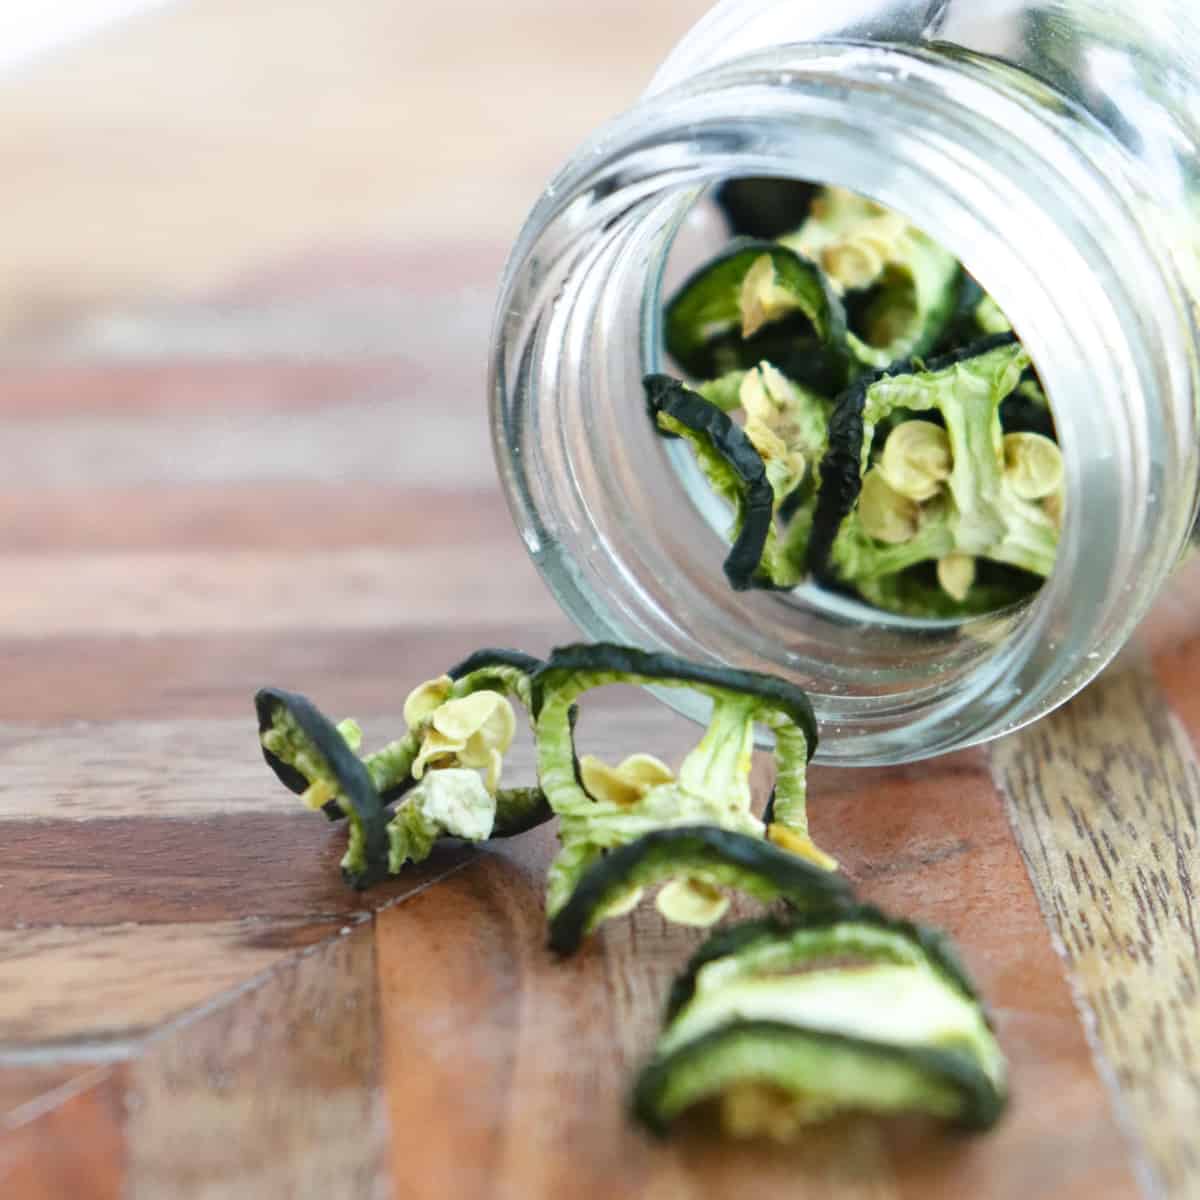 https://seasonandthyme.com/wp-content/uploads/2022/09/dehydrated-jalapenos-featured.jpg